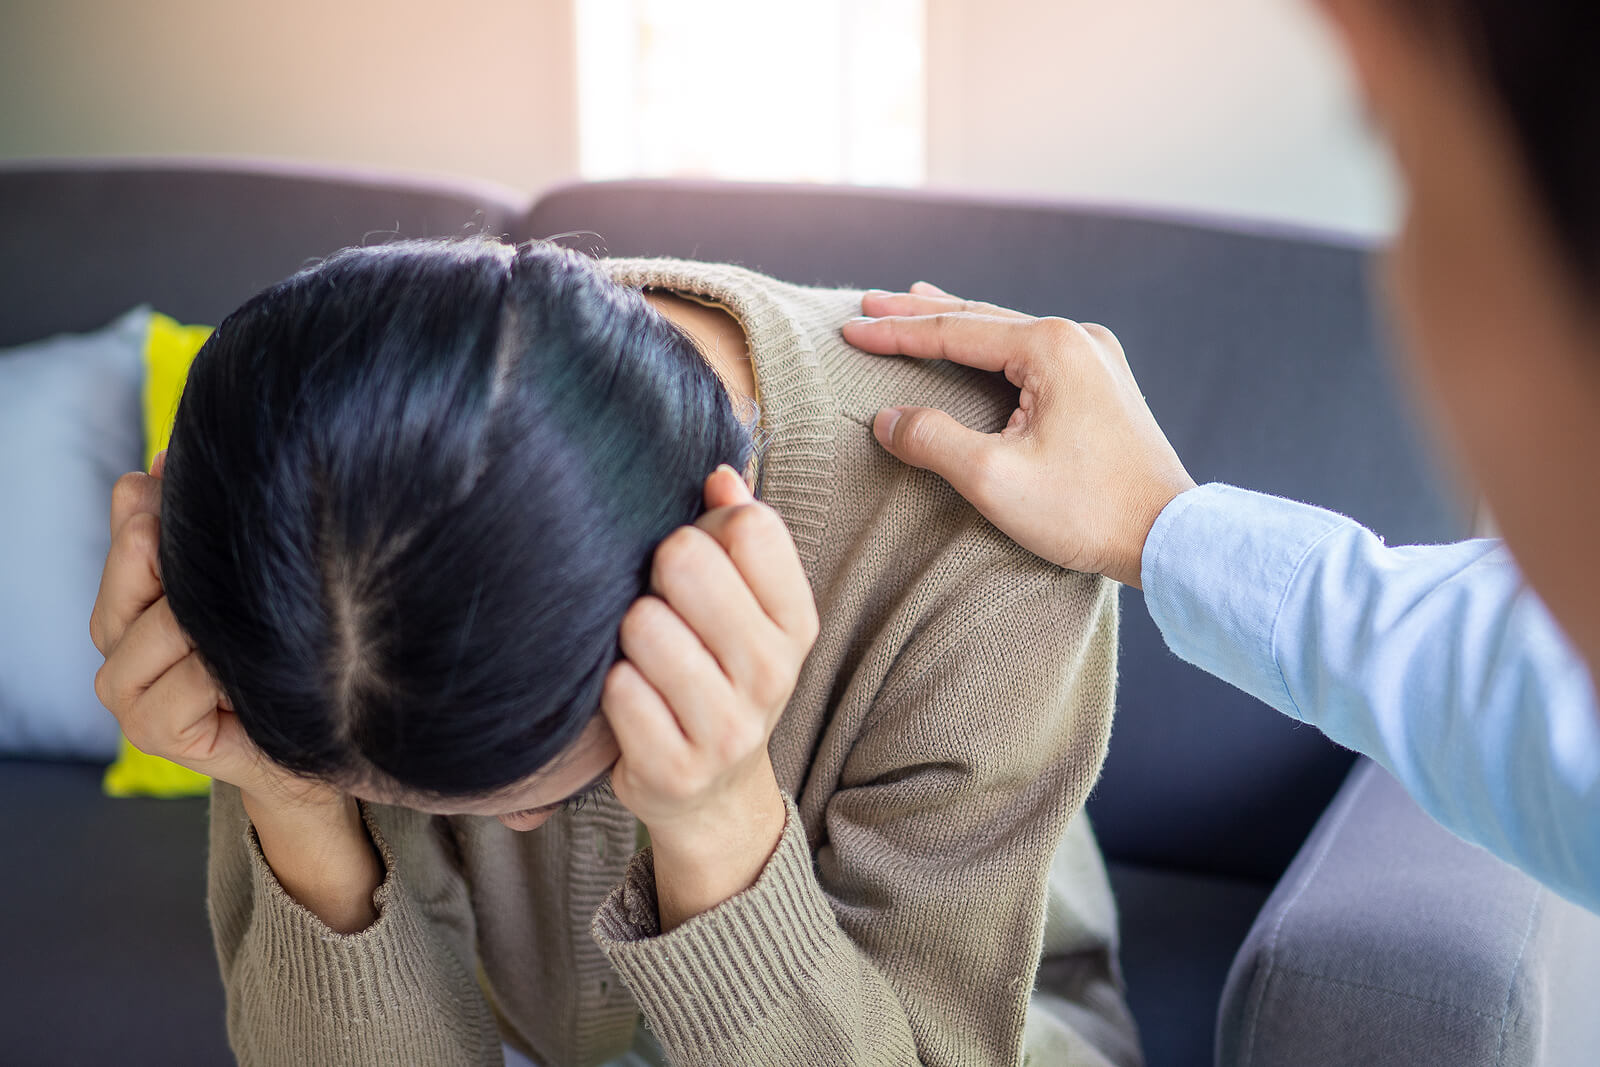 A woman is comforted by a man as she cries on a couch. Looking to learn the benefits that a trauma therapist can bring? Work through your developmental trauma in Austin, TX through trauma therapy today!